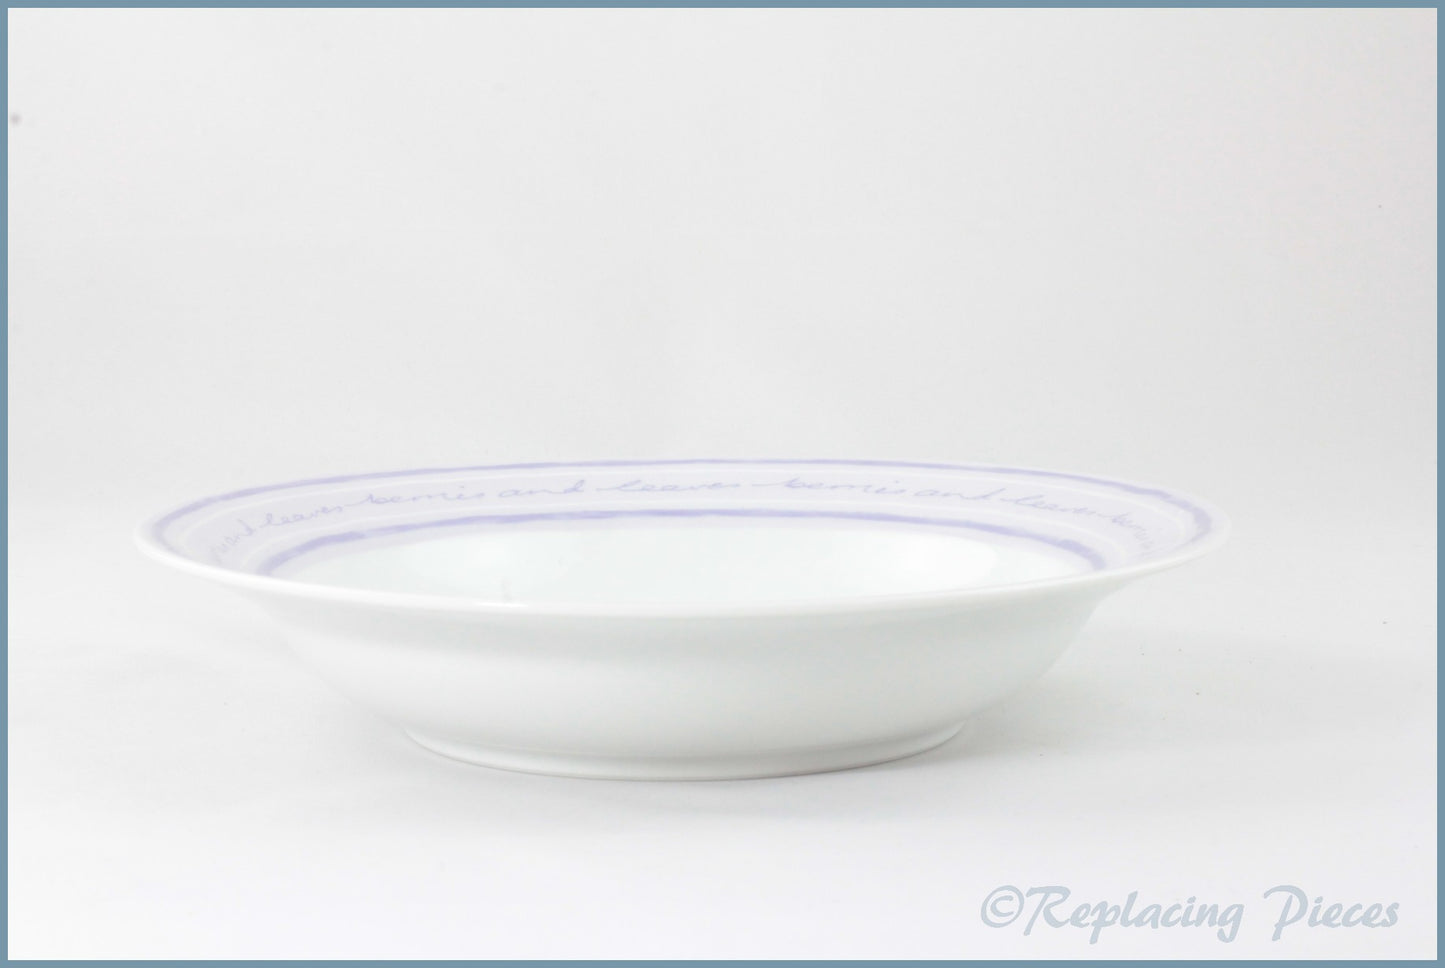 Marks & Spencer - Berries And Leaves - 6 1/2" Side Plate